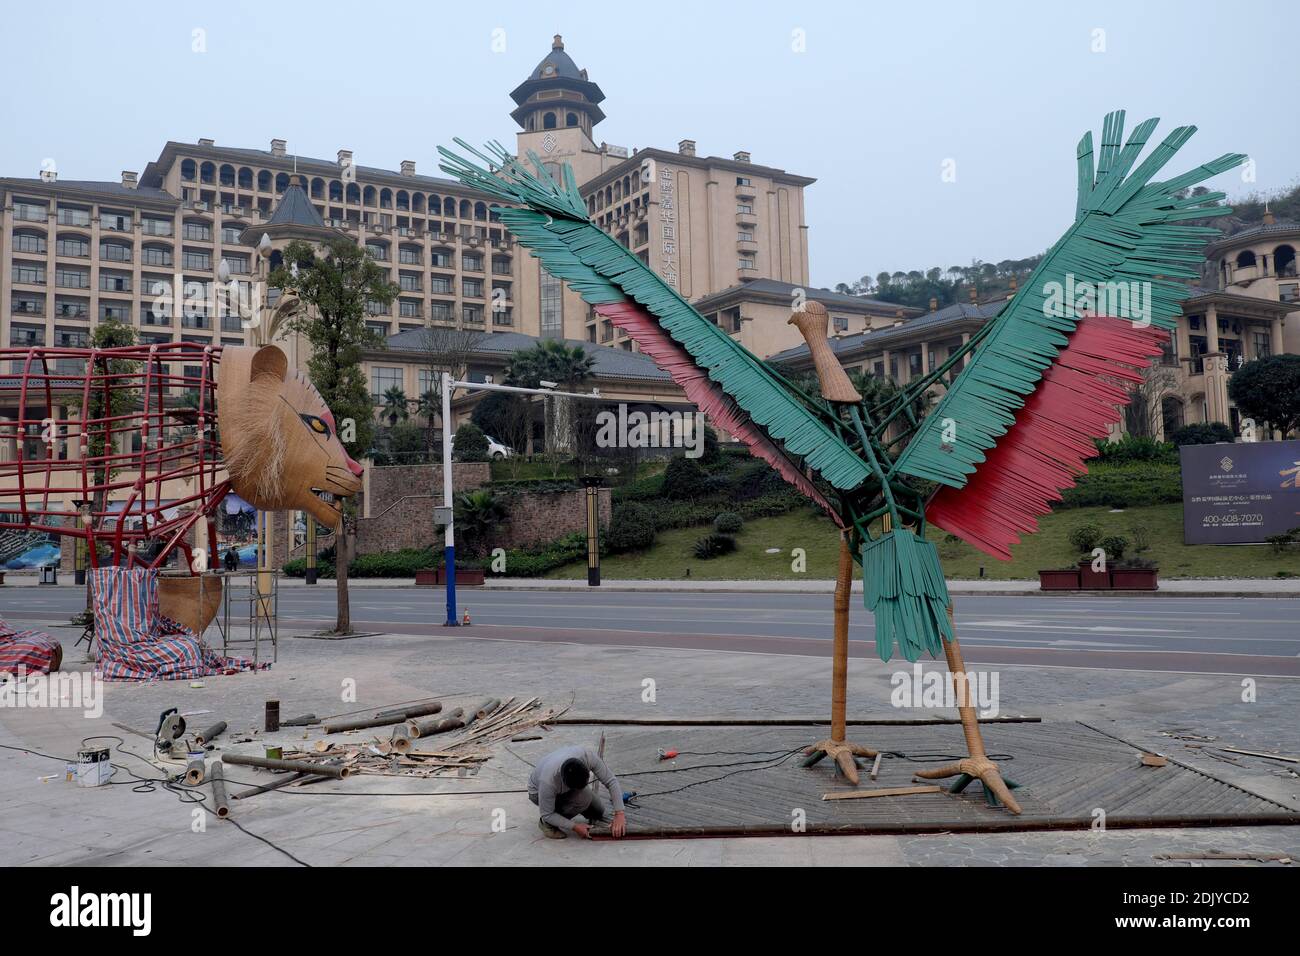 Exclusive. Workers finish the giant animals displayed in the city of Chishui.The Woo of Chishui is an art project elaborated by the artist Gad Weil in association with the city's tourist office to promote tourism in the region. The red color of the steel represents the red river that runs through Chishui and the green steel symbolizes the Tree Fern (Cibotium Barometz) and the bamboo very present in the area. Heads and feet of the five giant animals (a crane bird, a tiger, and not built yet: a monkey, a dolphin and a dinosaur) are made out of bamboo. The eco-friendly event is meant to invite pe Stock Photo